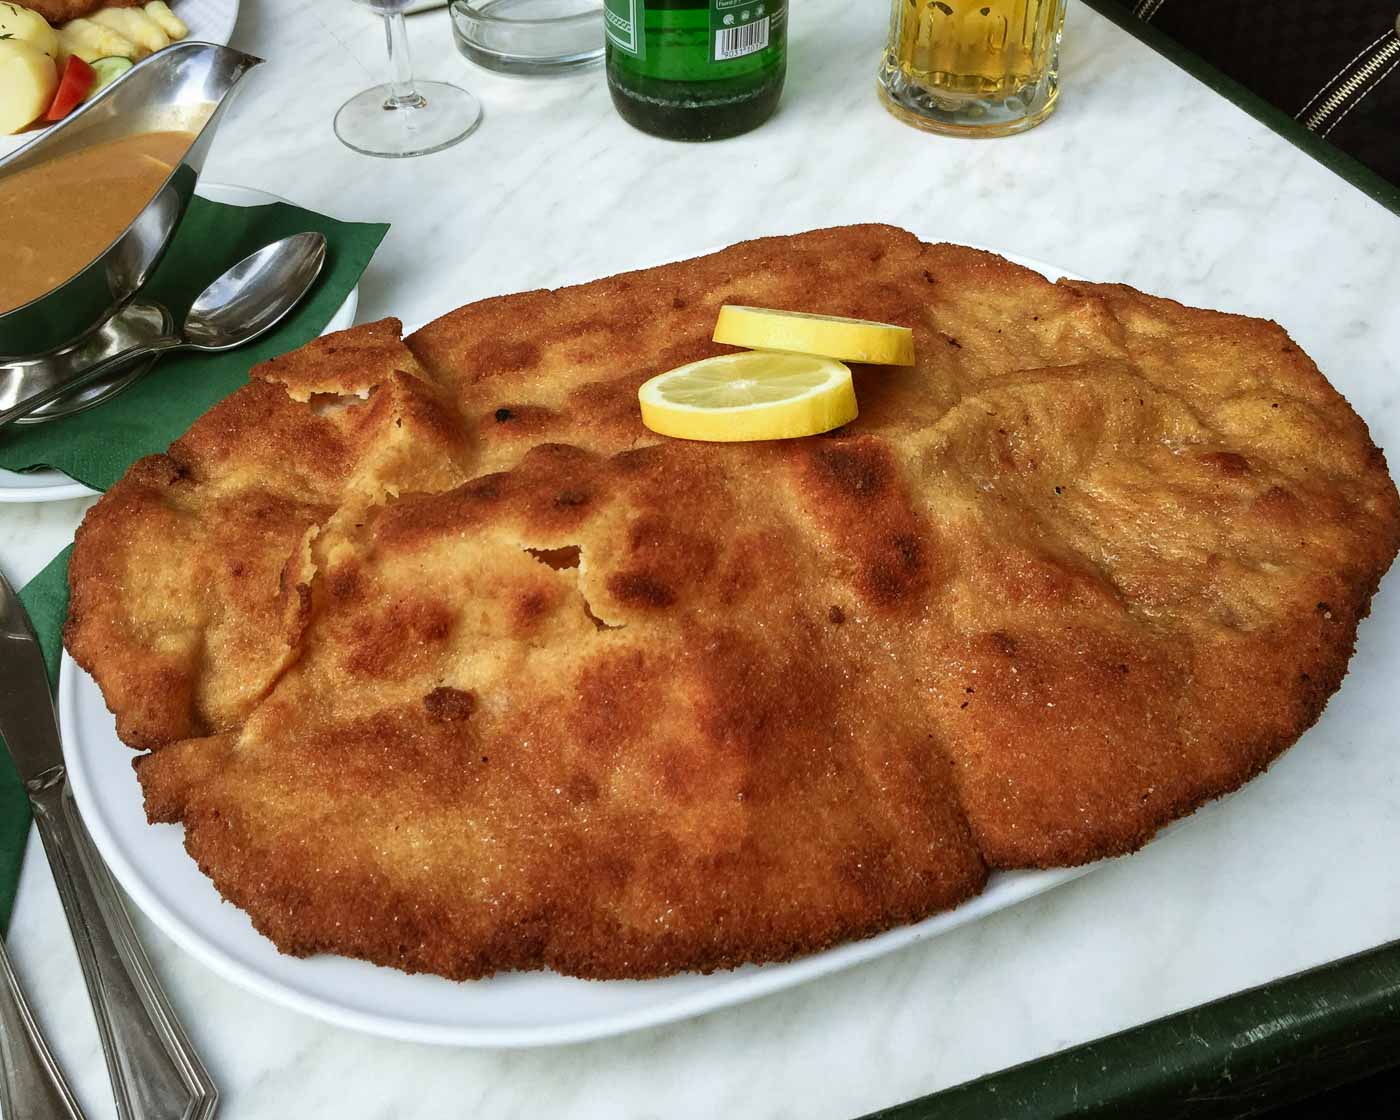 Get ready to conquer Berlin's biggest schnitzel at Louis! This legendary restaurant in historic Rixdorf serves up an epic pork schnitzel that's over a kilo. Discover the taste of tradition and challenge your appetite.